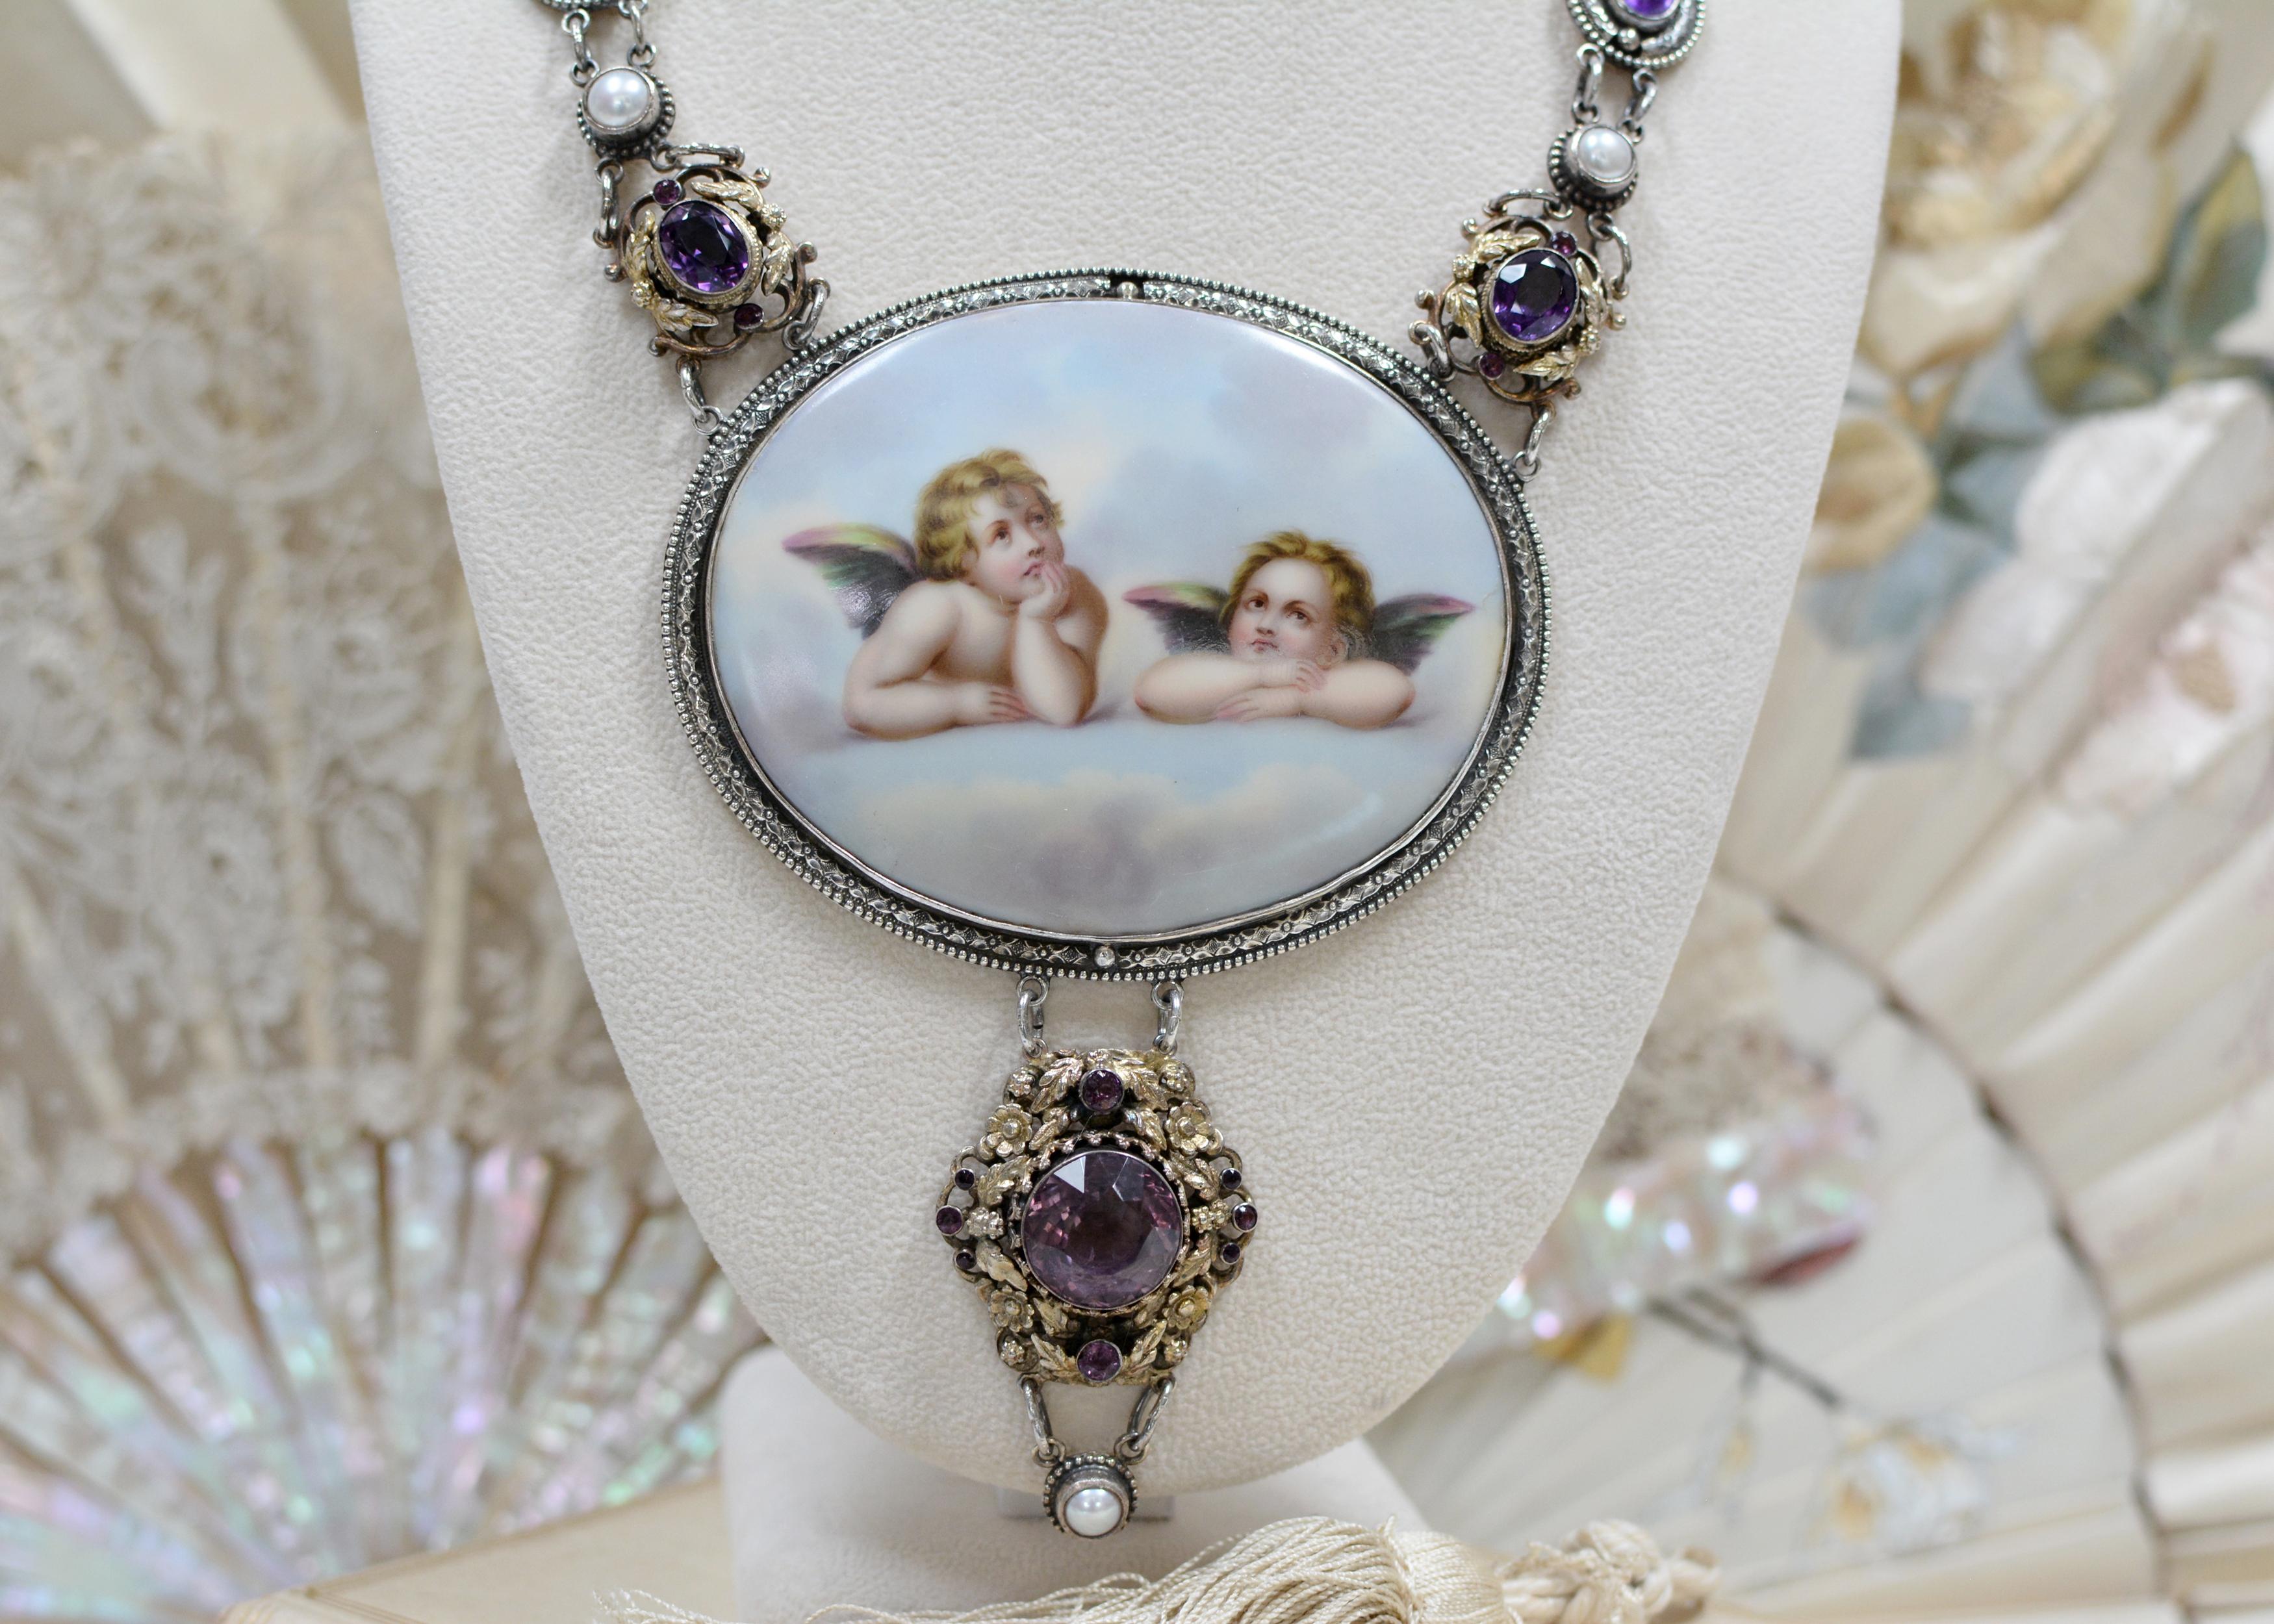 Rococo Jill Garber 19th Century Sistine Madonna Angels Portrait Necklace with Amethyst For Sale